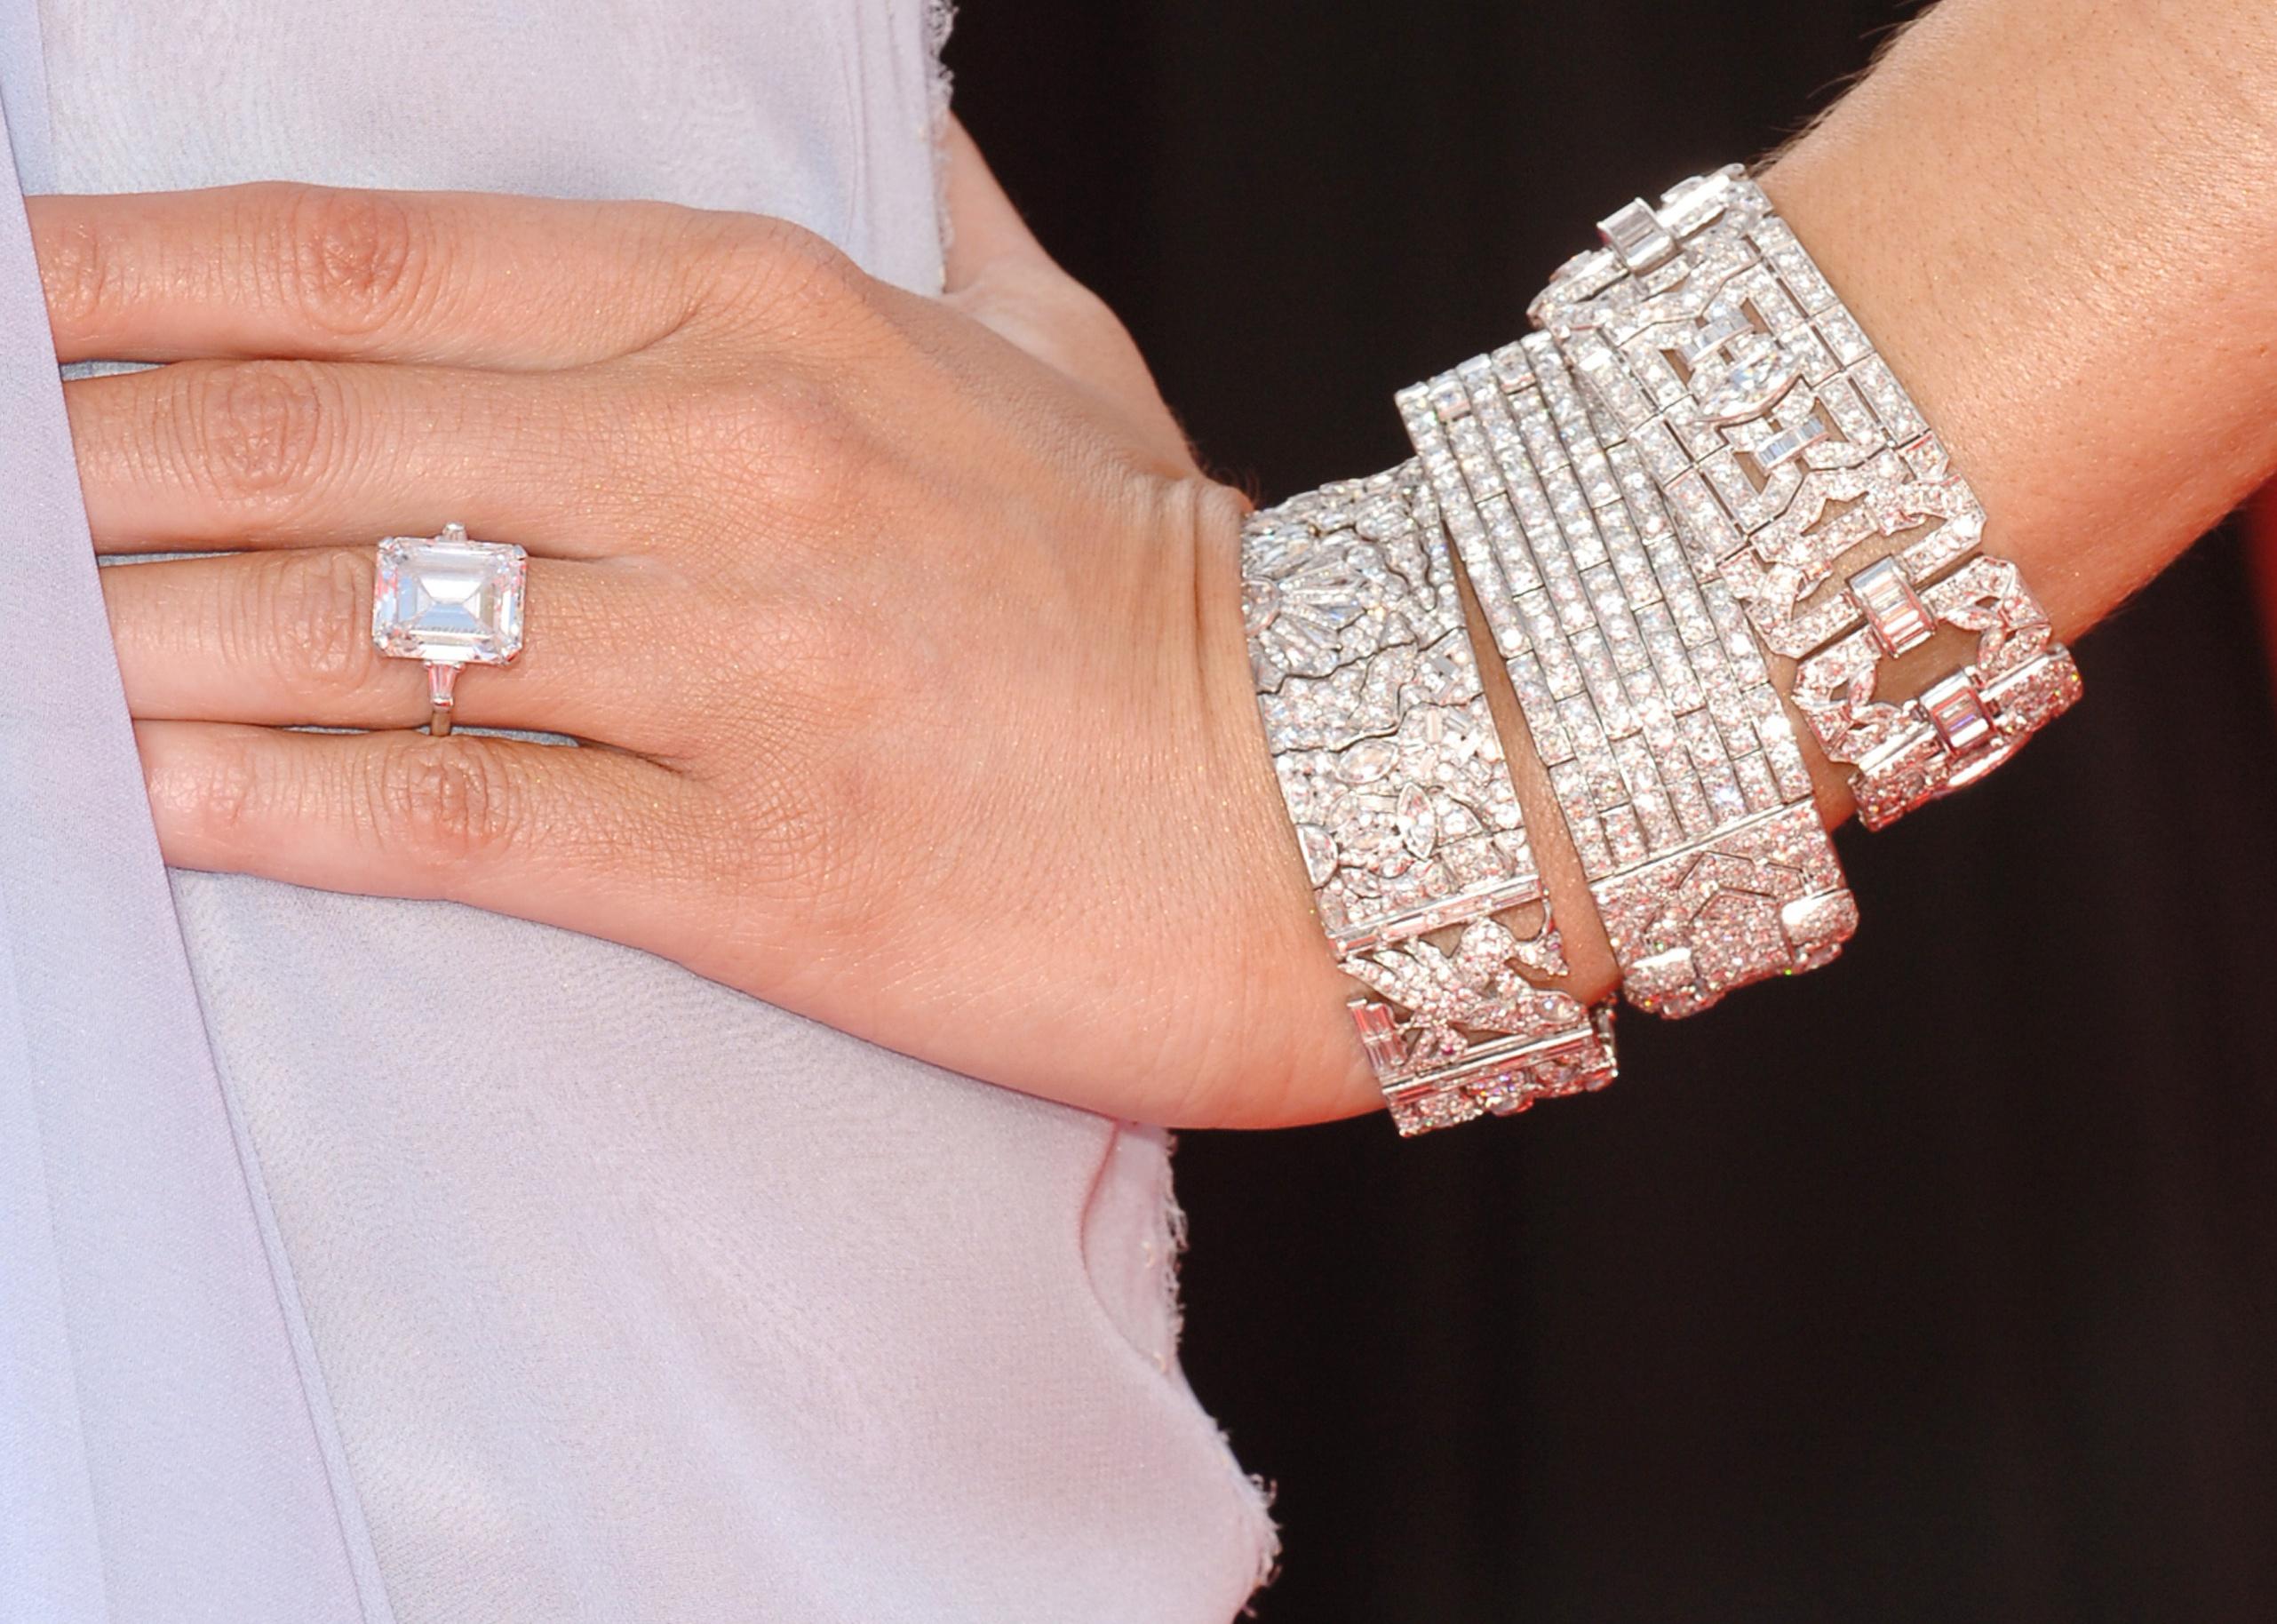 A close-up of Melania Trump's hand with engagement ring and diamond bracelets.